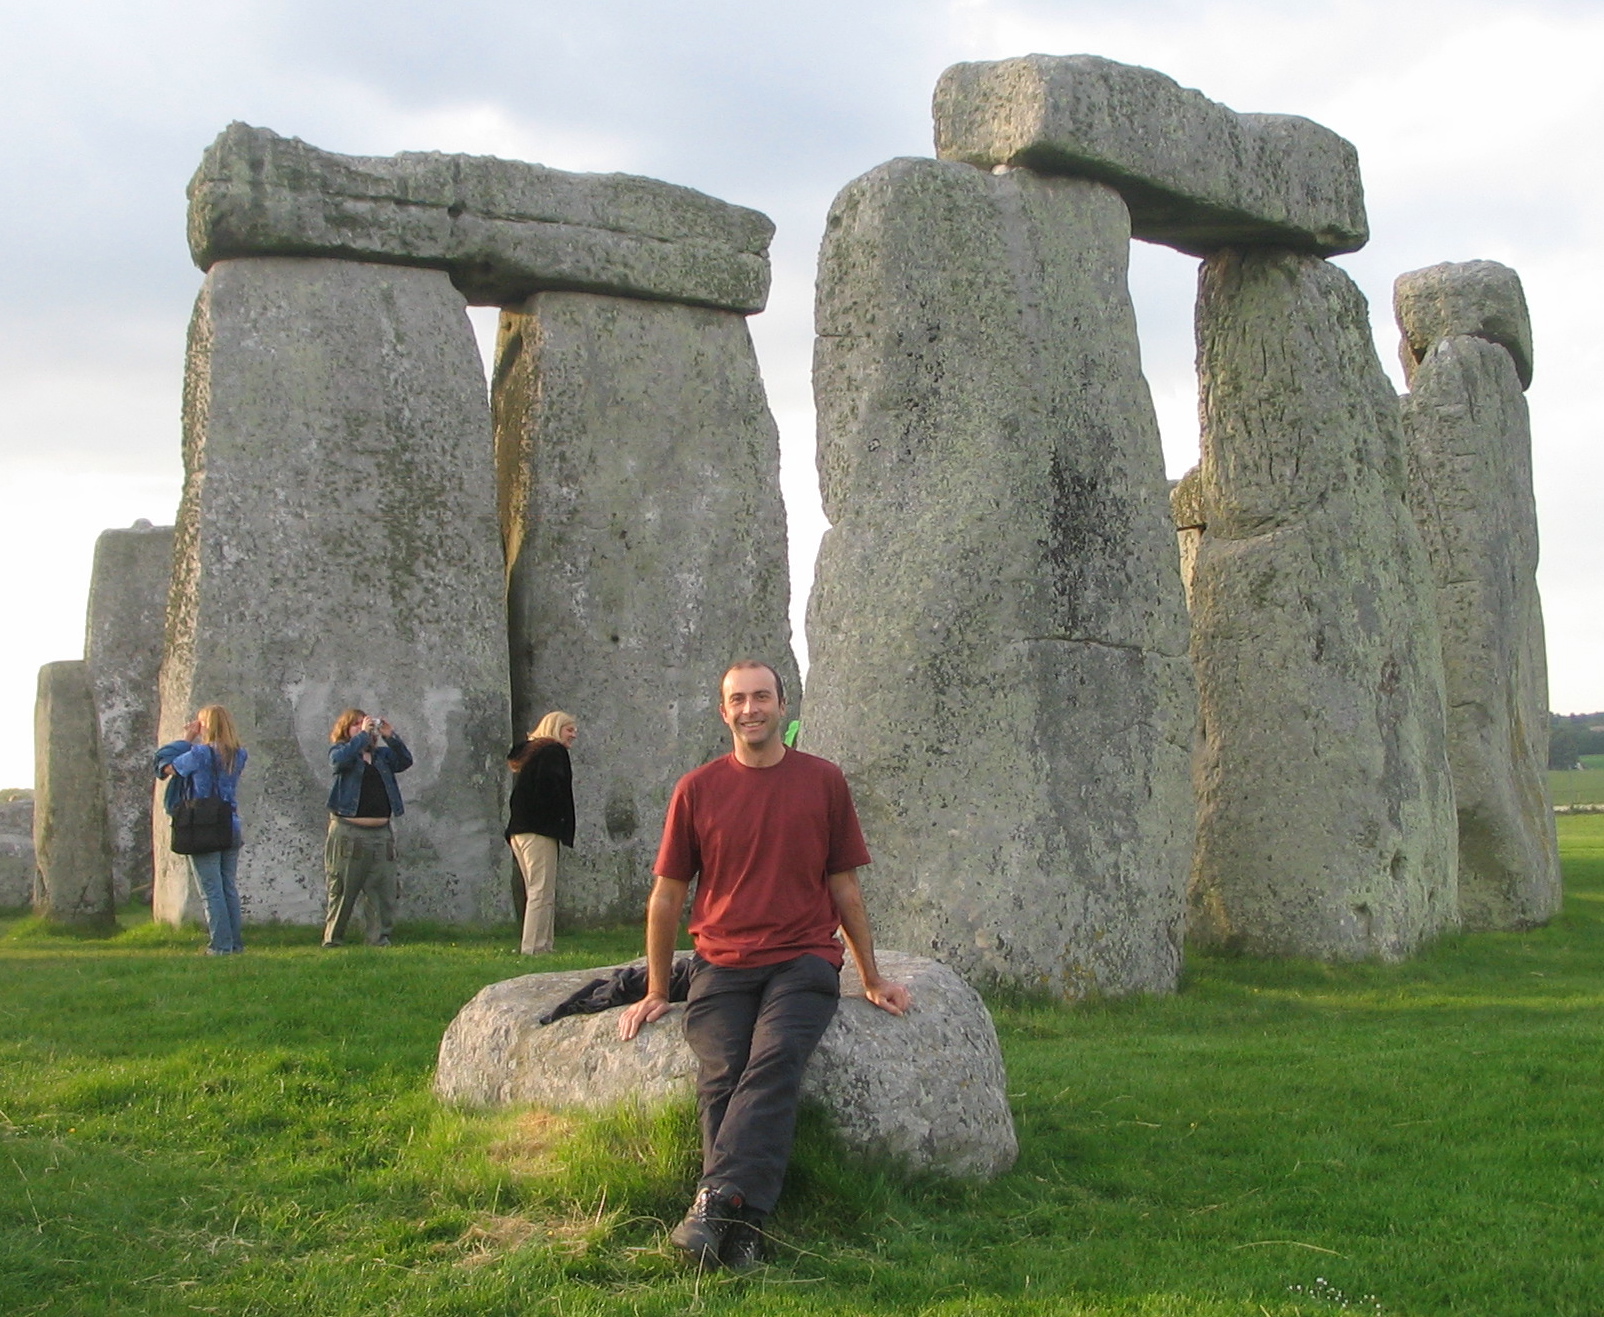 a man sitting on a rock in front of a group of stone structures with Stonehenge in the background